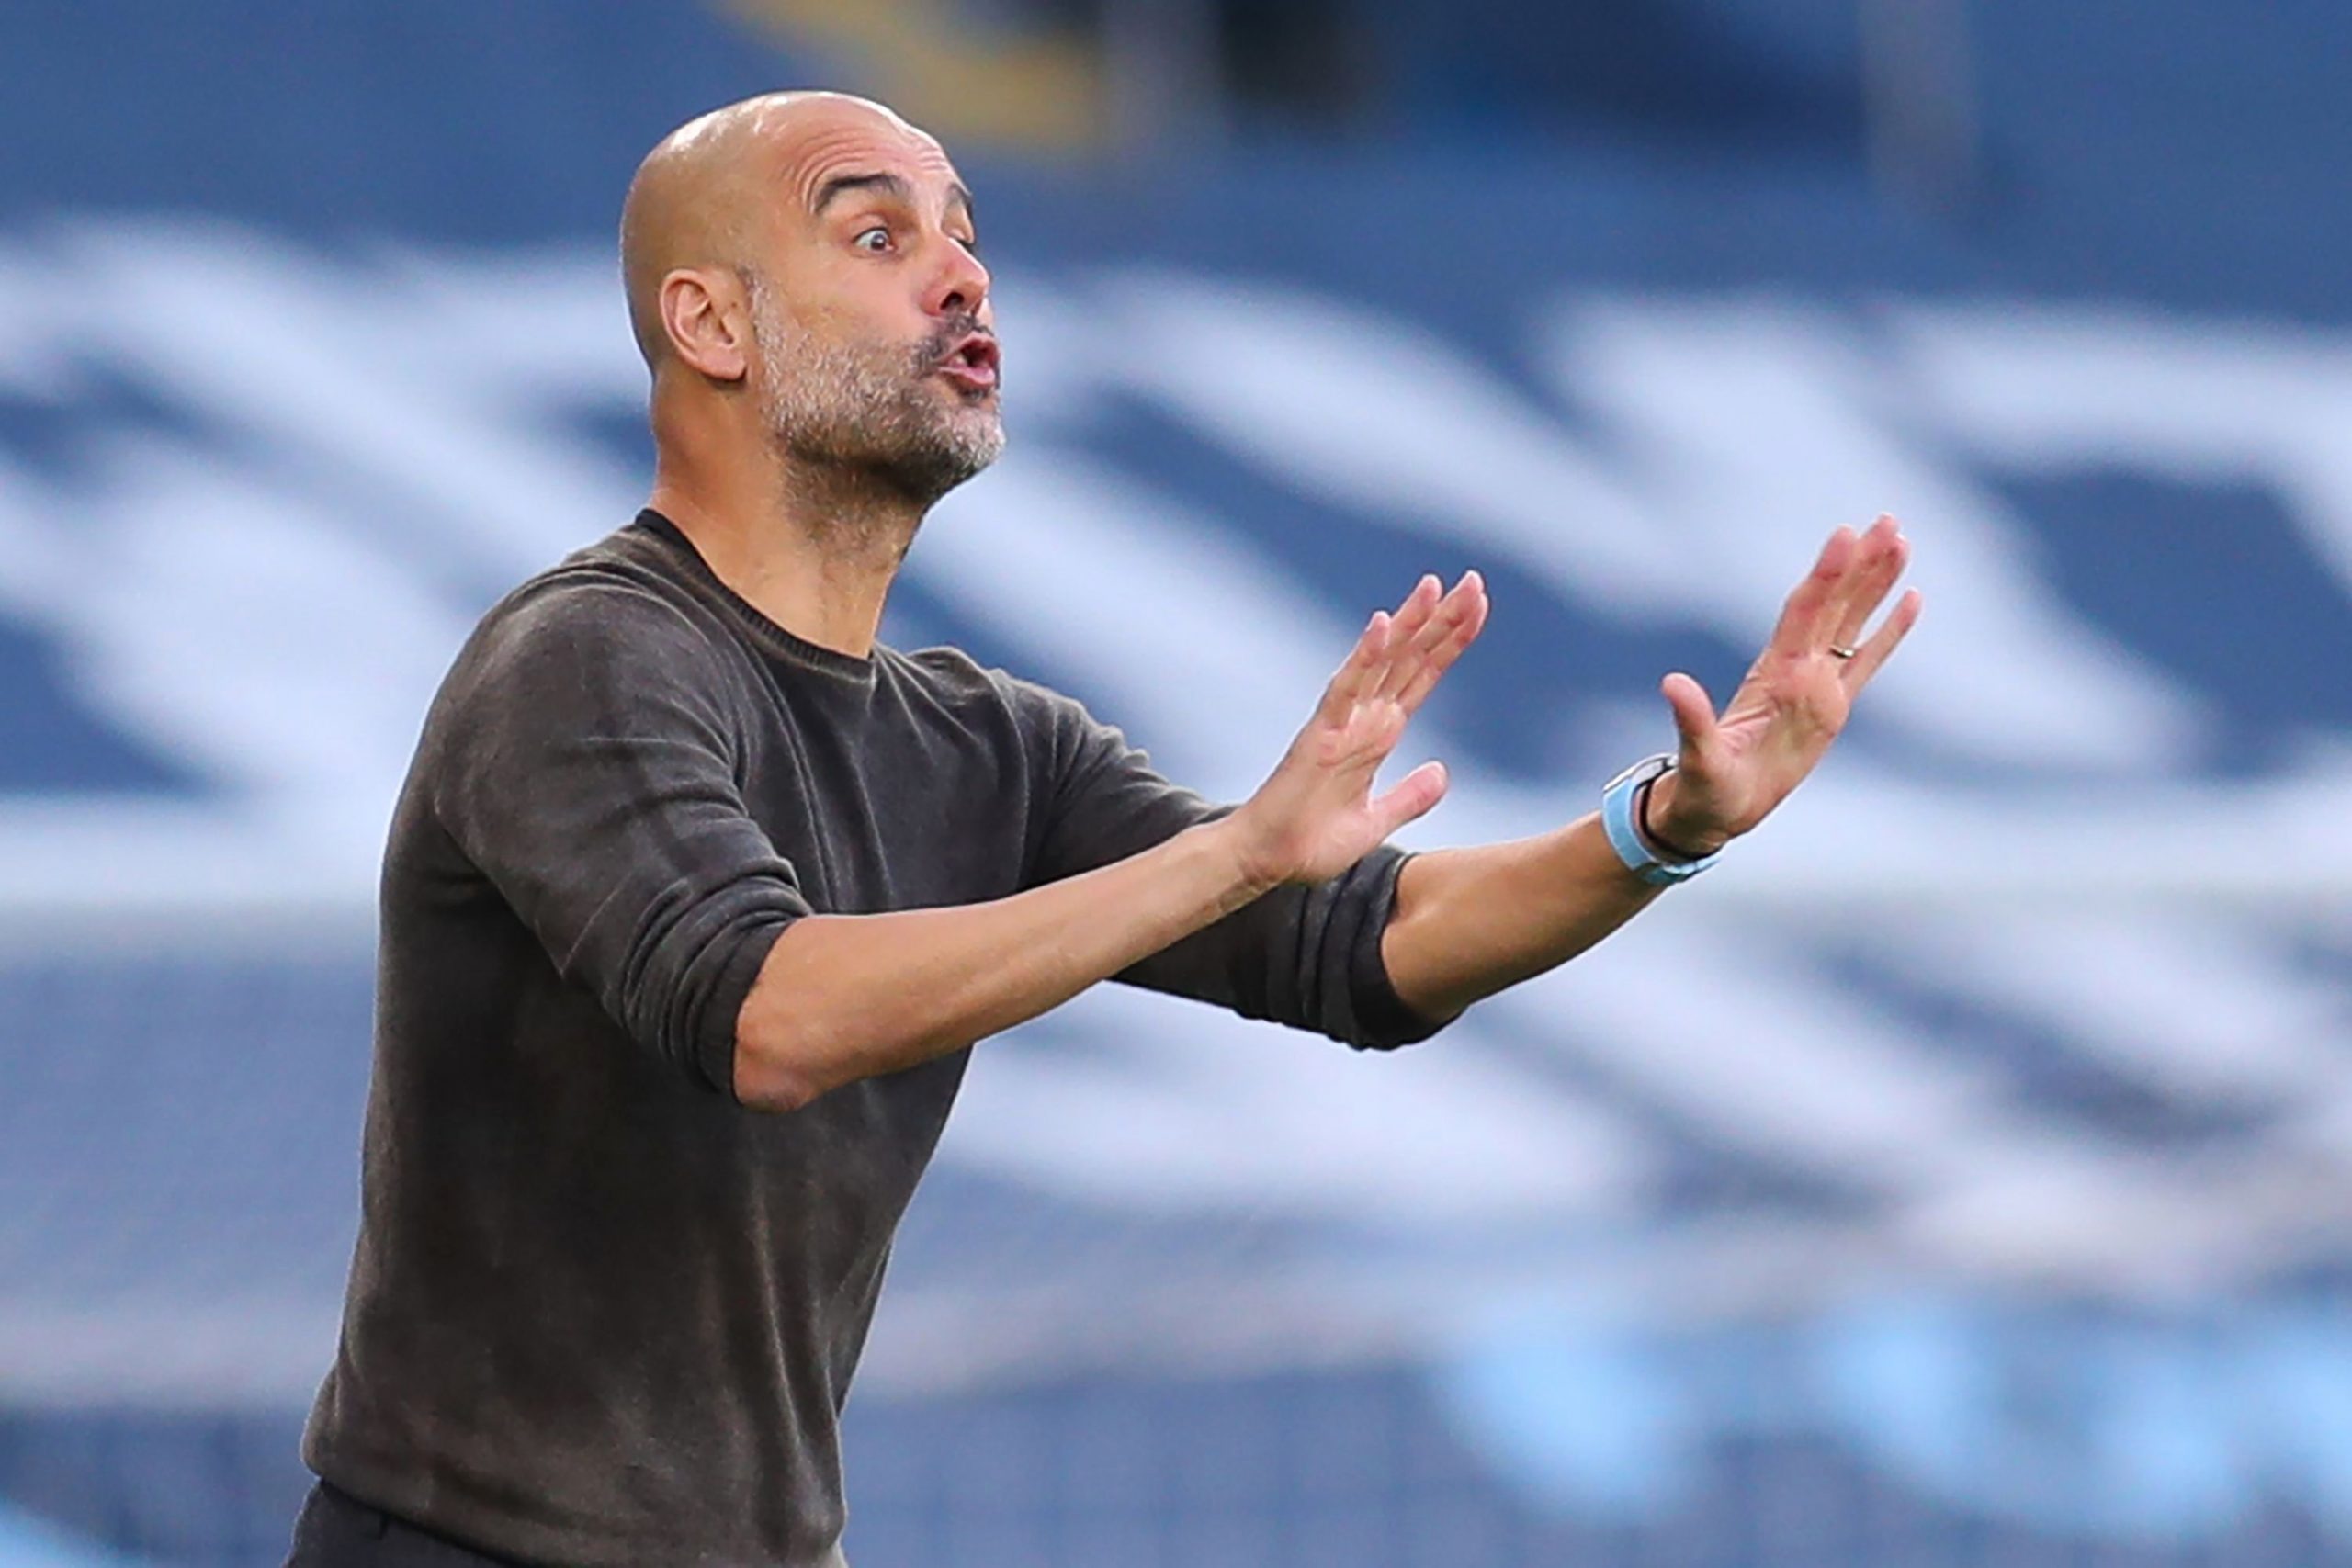 'EPL Coaches Live On Results'- Pep Guardiola